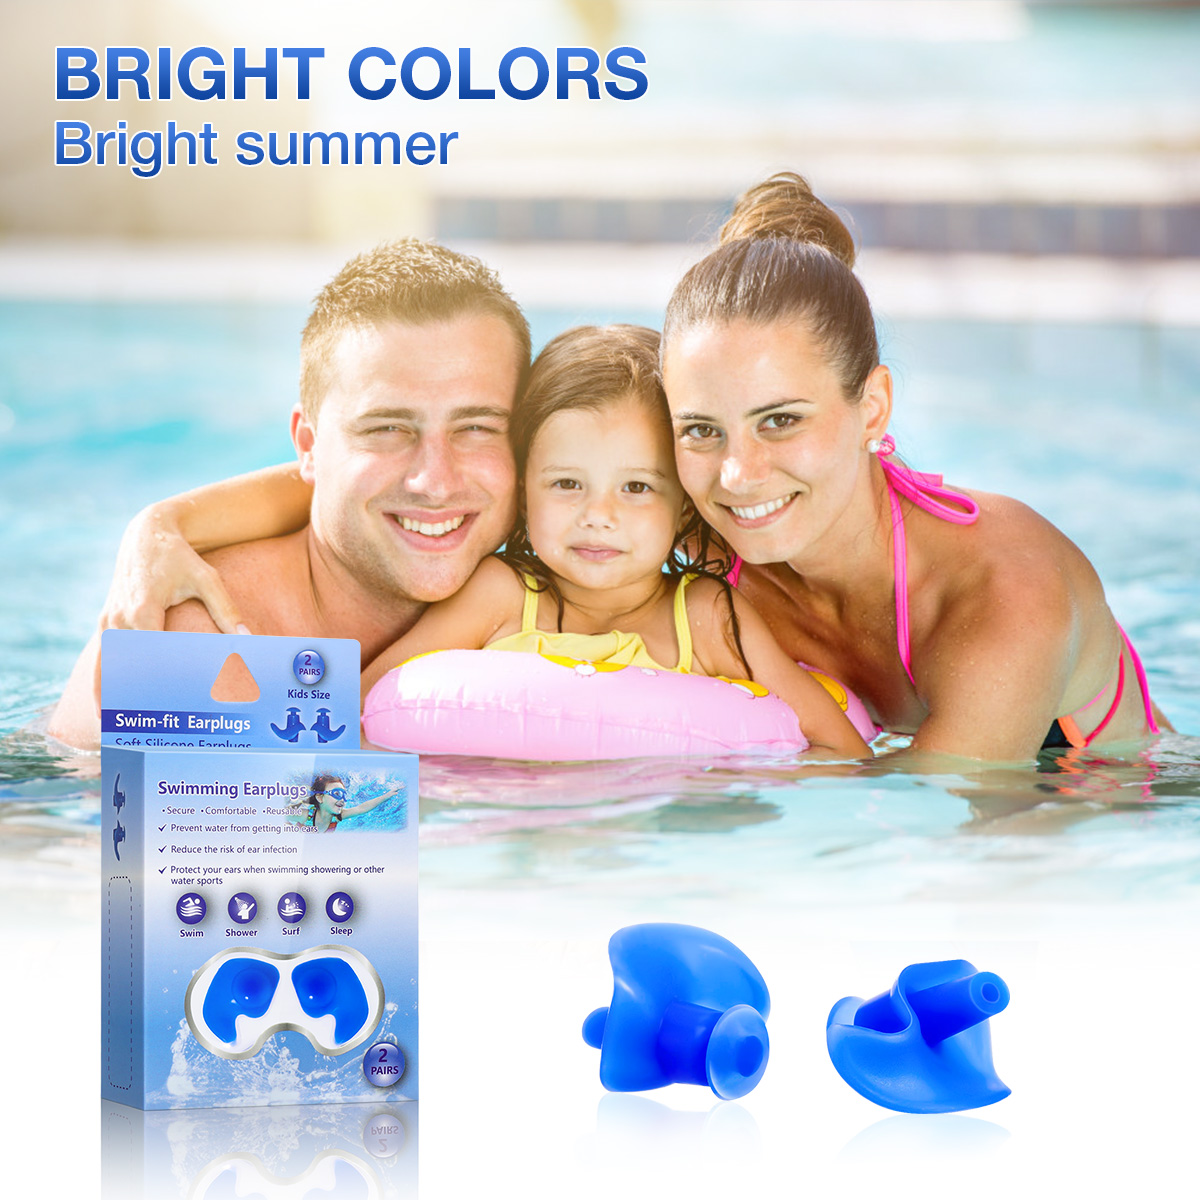 2-Pairs-Kids-Upgraded-Silicone-Swimming-EarPlugs-Waterproof-Reusable-Silicone-Ear-Plugs-for-Swimming-1719183-7